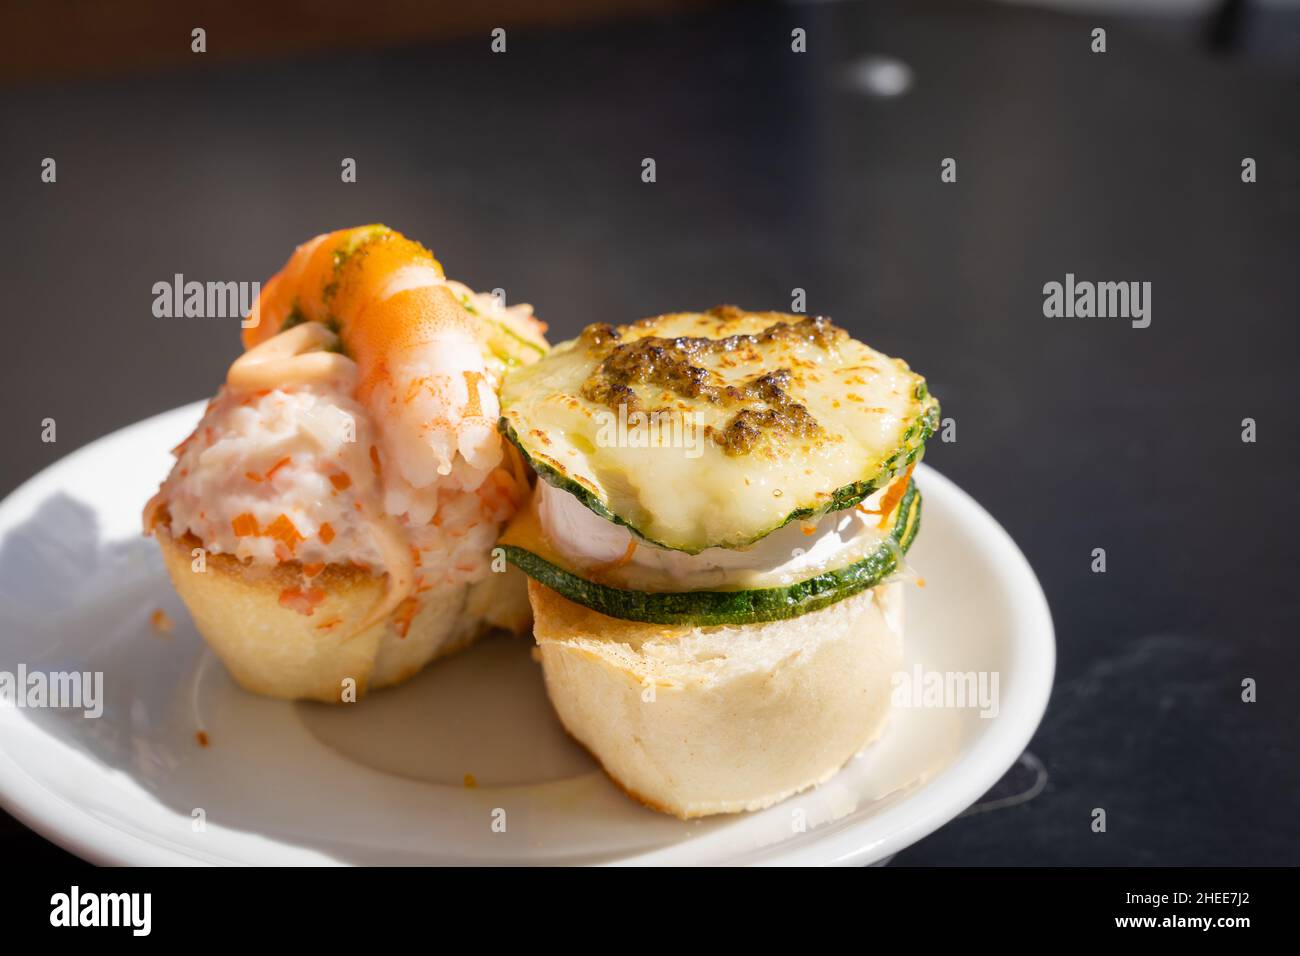 Delicious Spanish tapas on plate with bread, prawn, cheese and zucchini on  top. Restaurant food, bar snack, gourmet concepts Stock Photo - Alamy